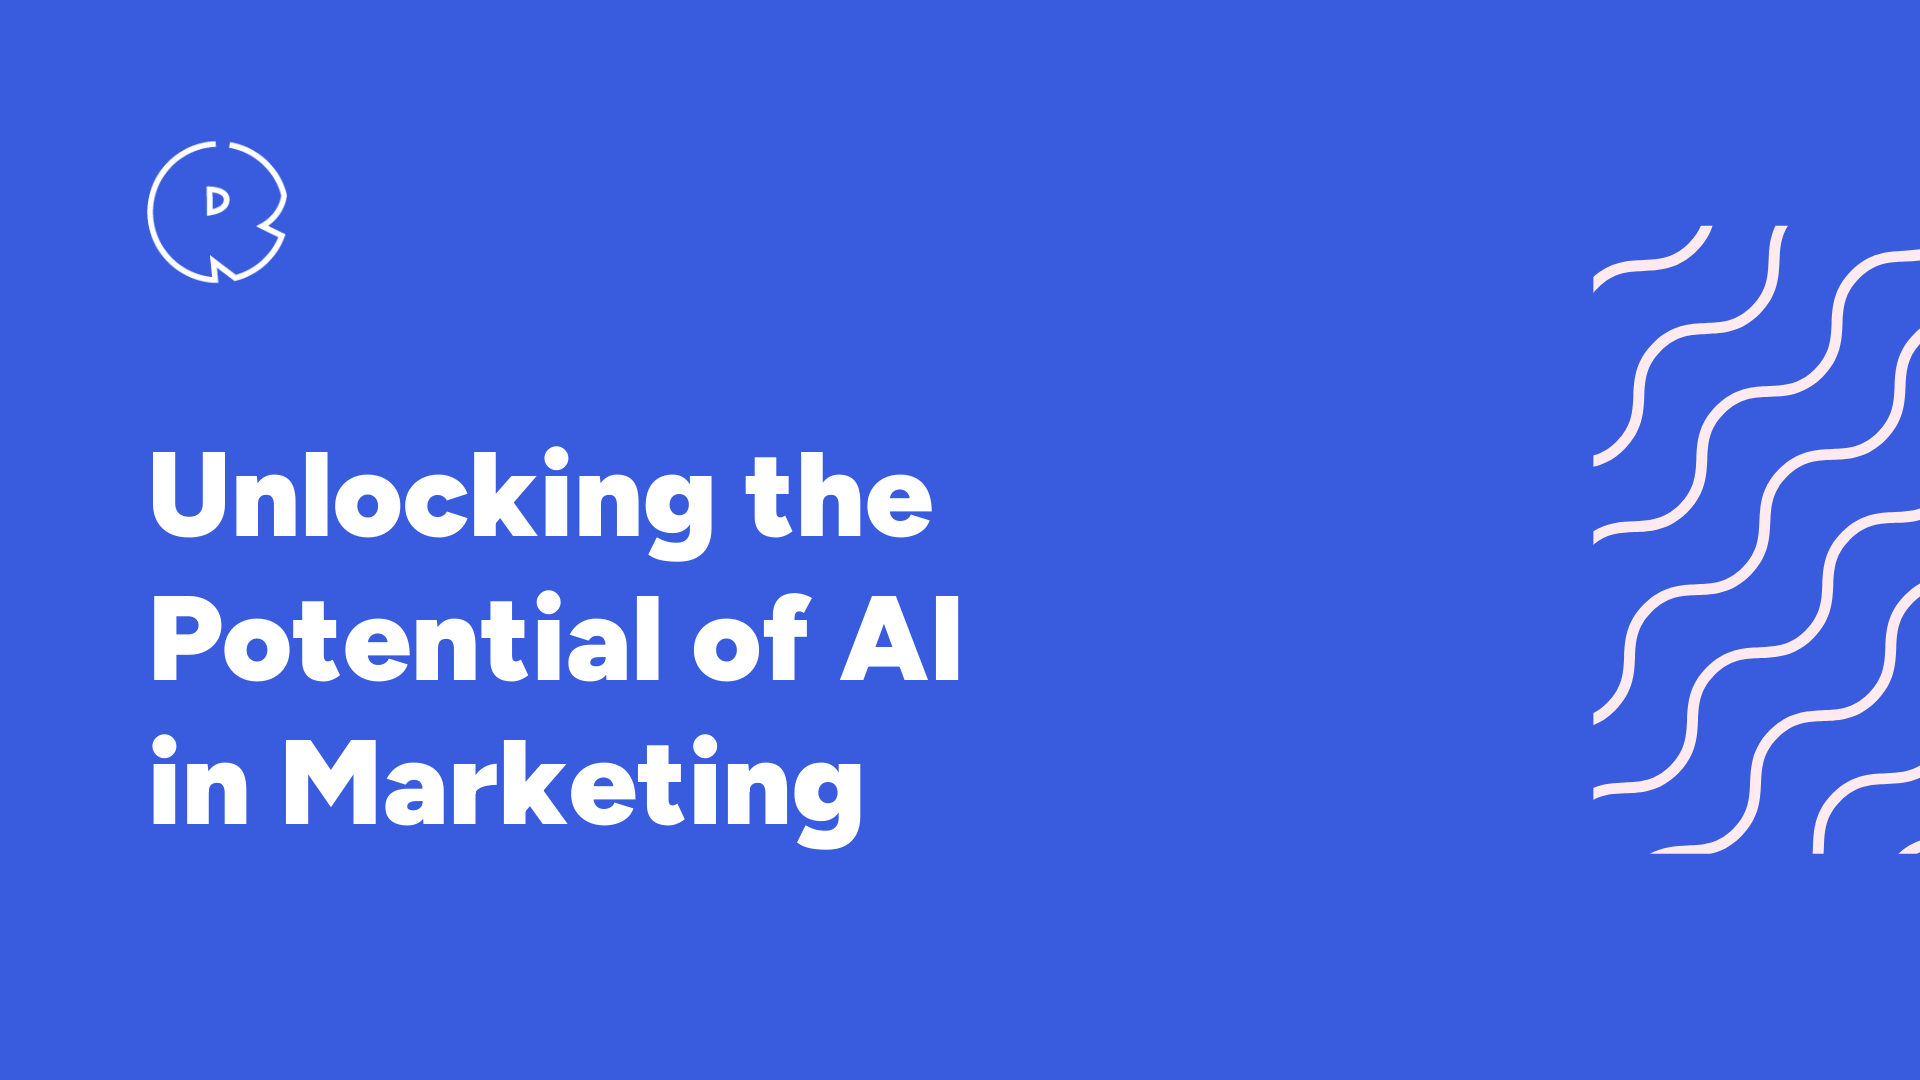 Unlocking the Potential of AI in Marketing